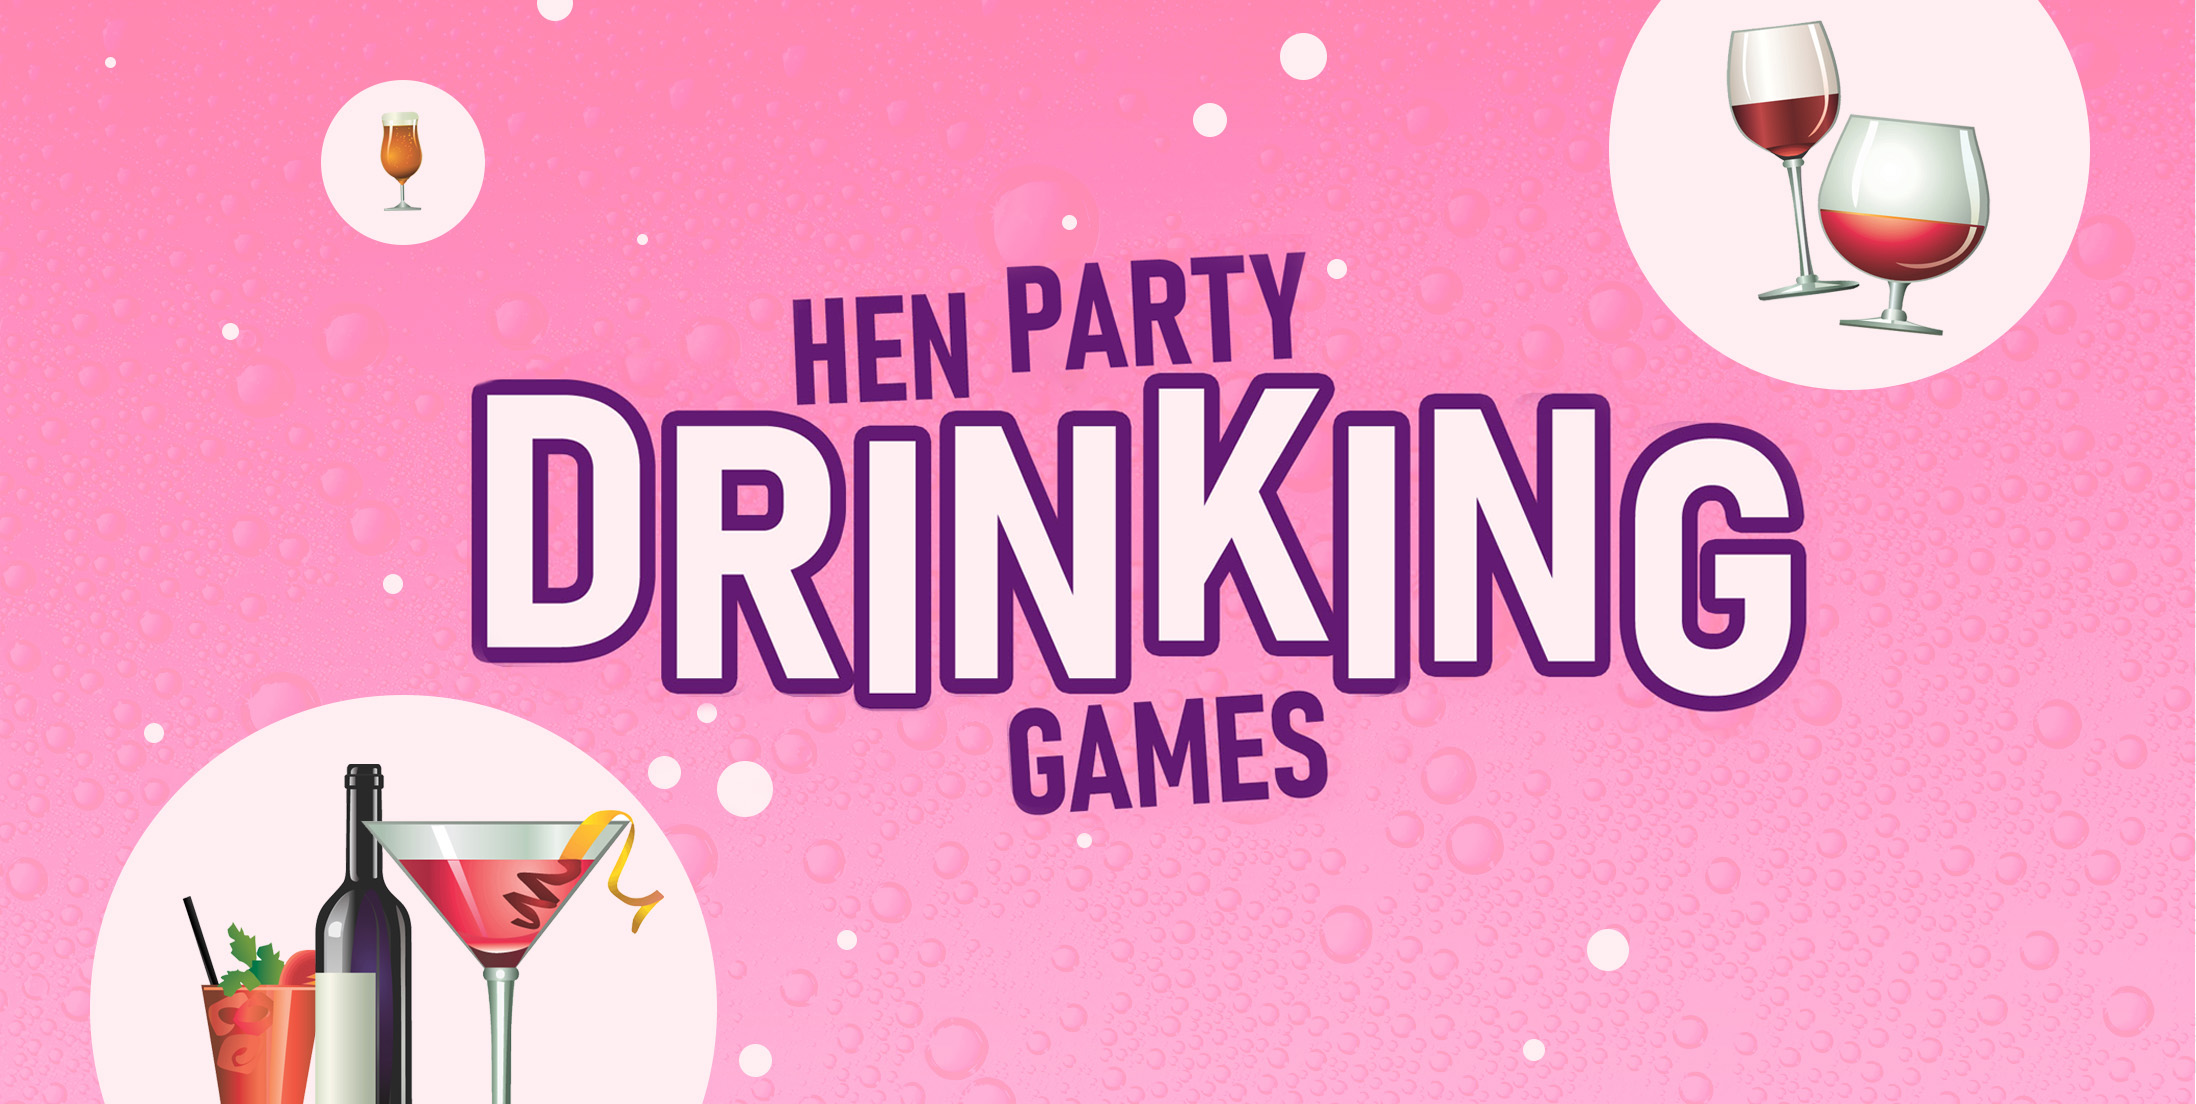 Hen Party Drinking Games for Your Hens Night